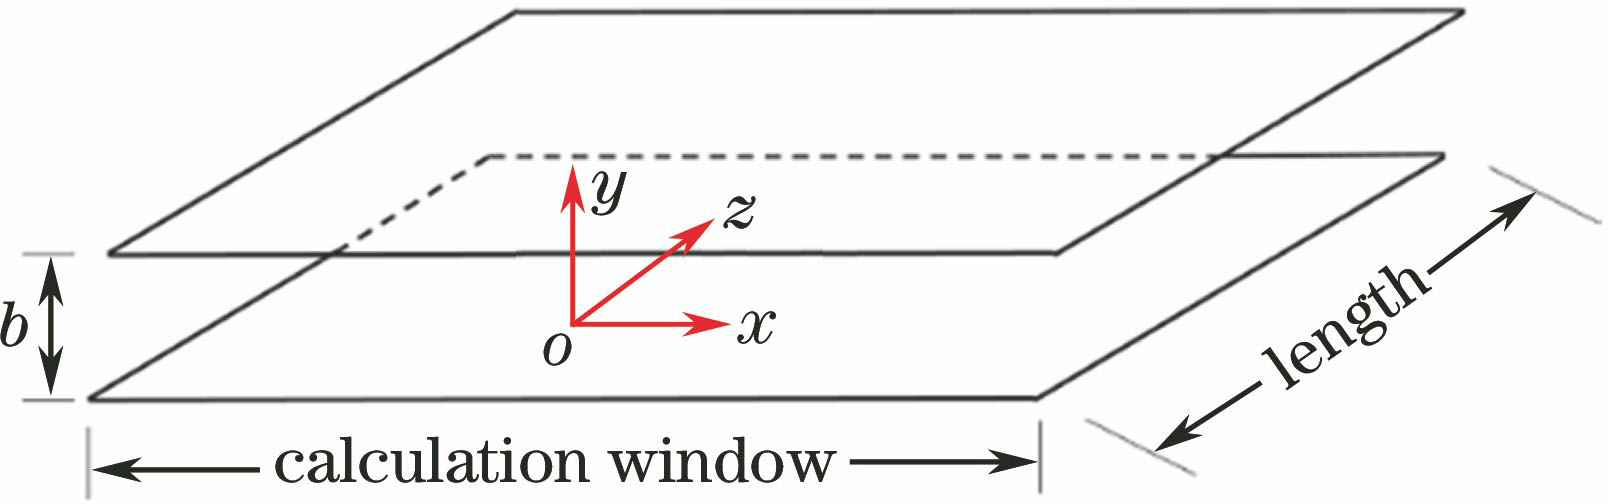 Three-dimensional structure of finite-length PPWG